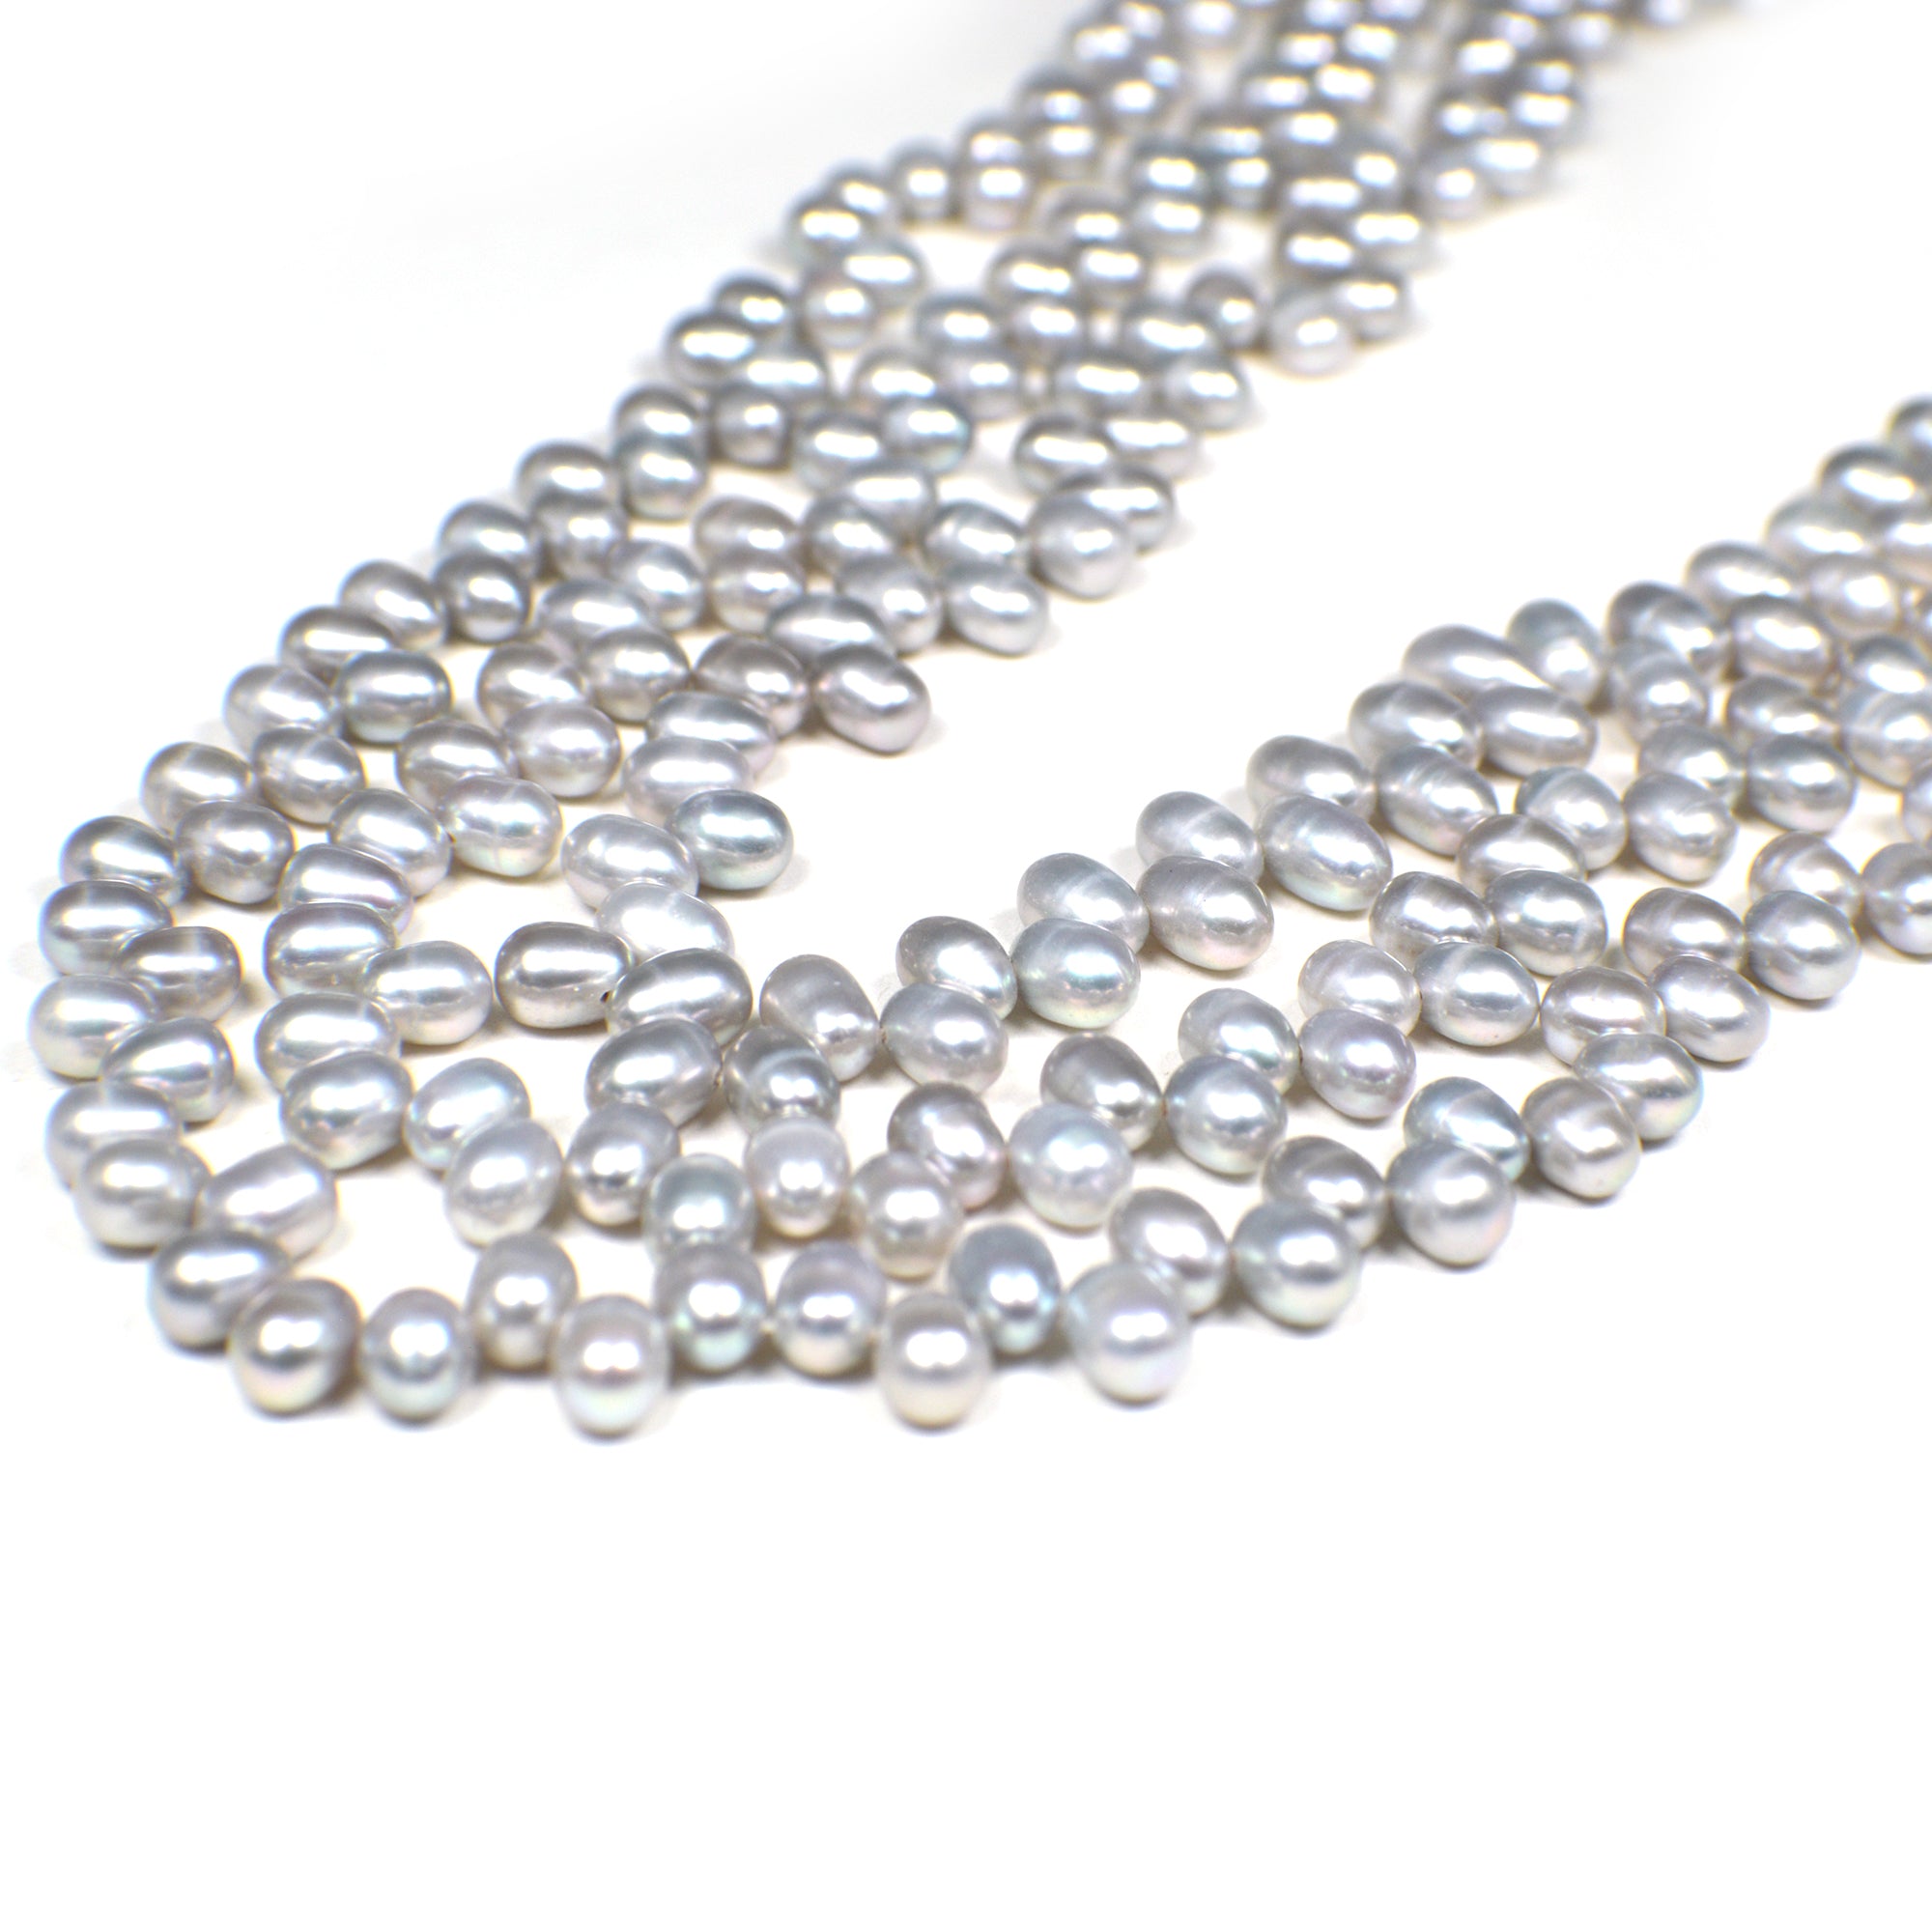 6x5 - 7x5 MM Gray Rice Freshwater Pearls Beads